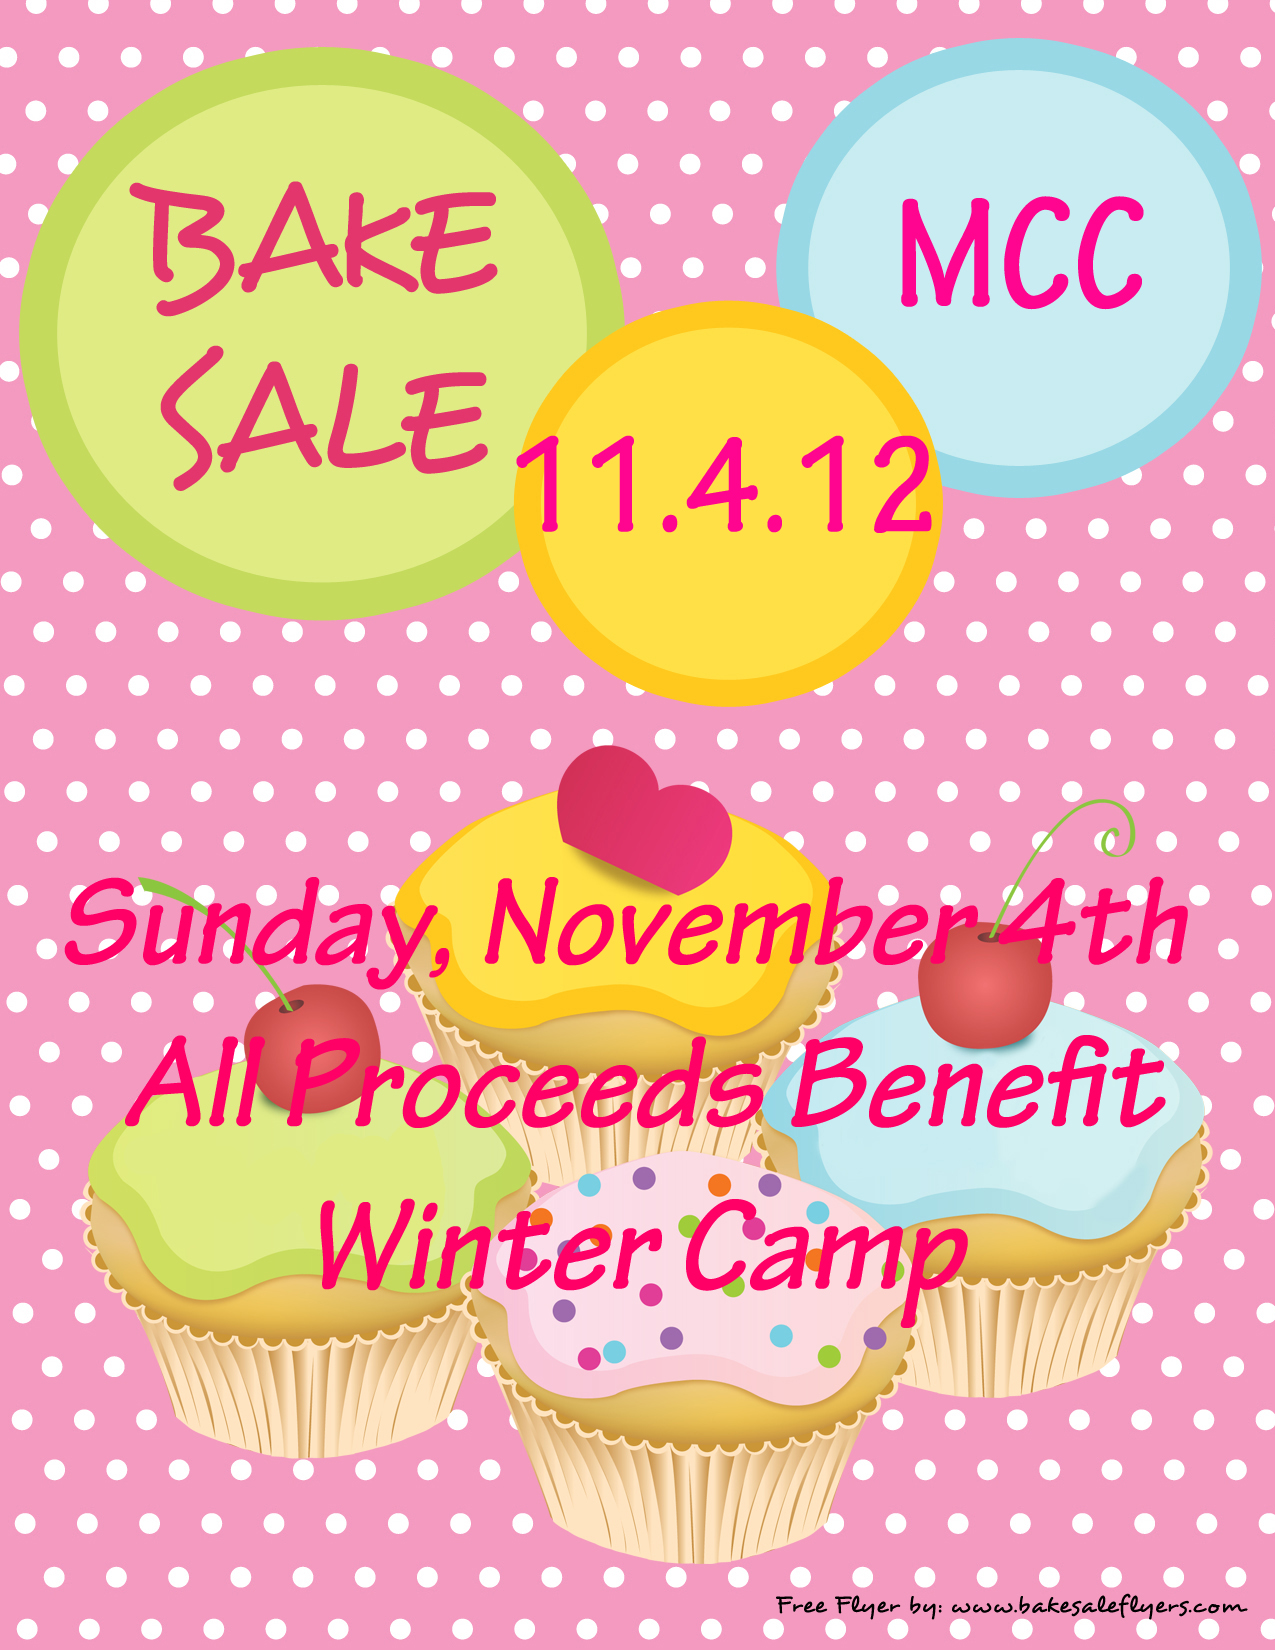 9-best-images-of-free-printable-bake-sale-templates-free-printable